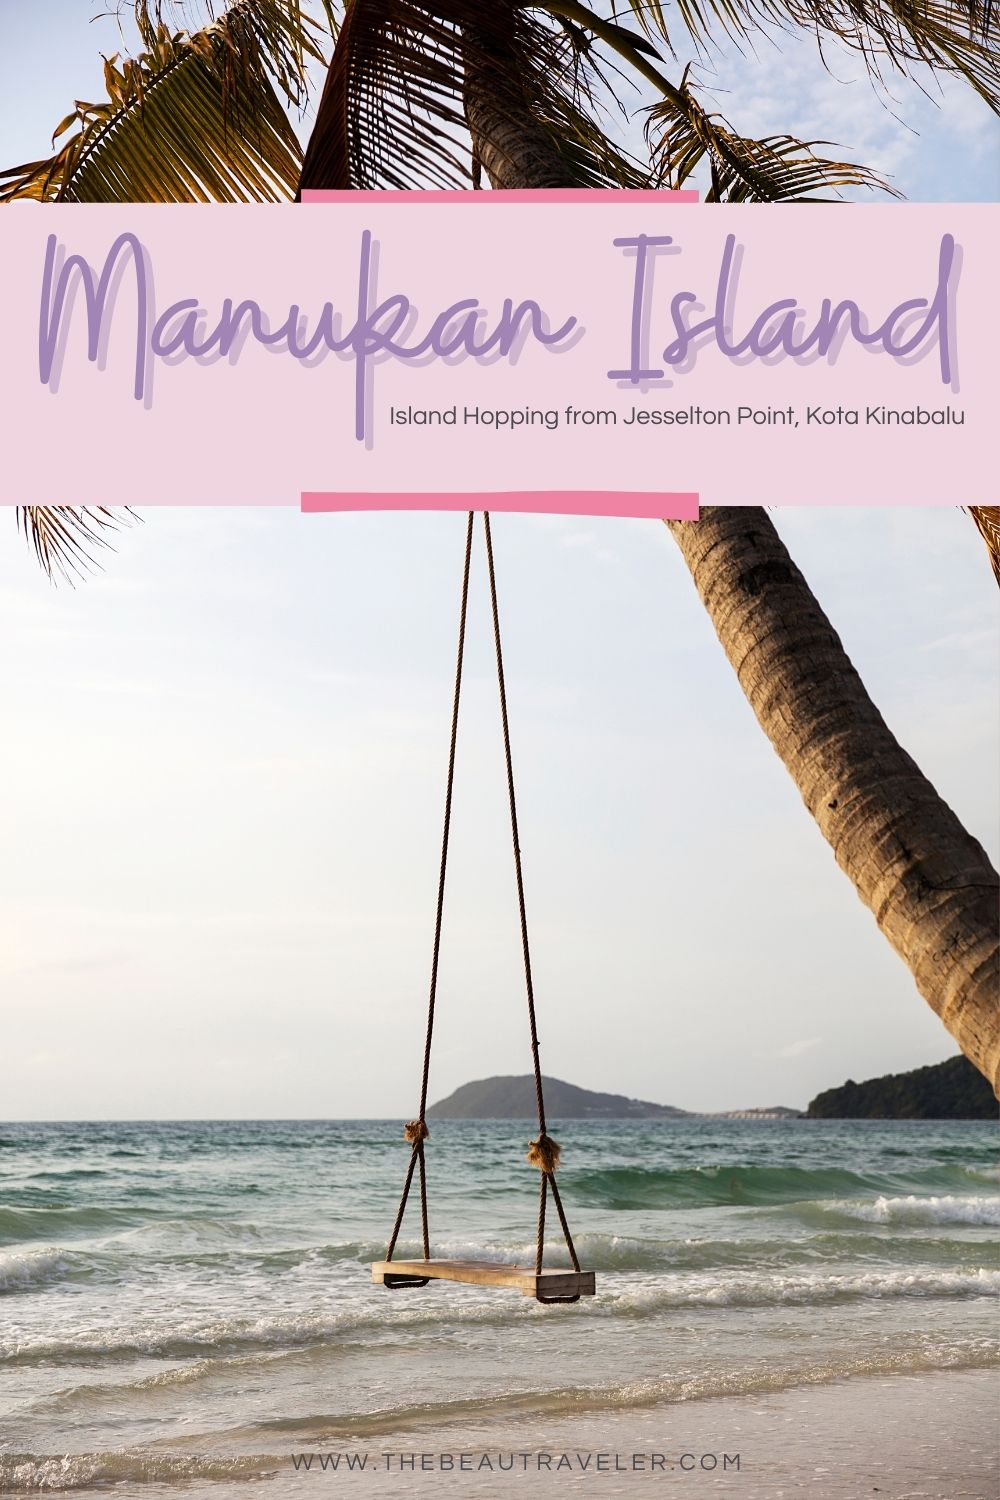 Island Hopping to Manukan Island from Jesselton Point, Sabah in East Malaysia - The BeauTraveler